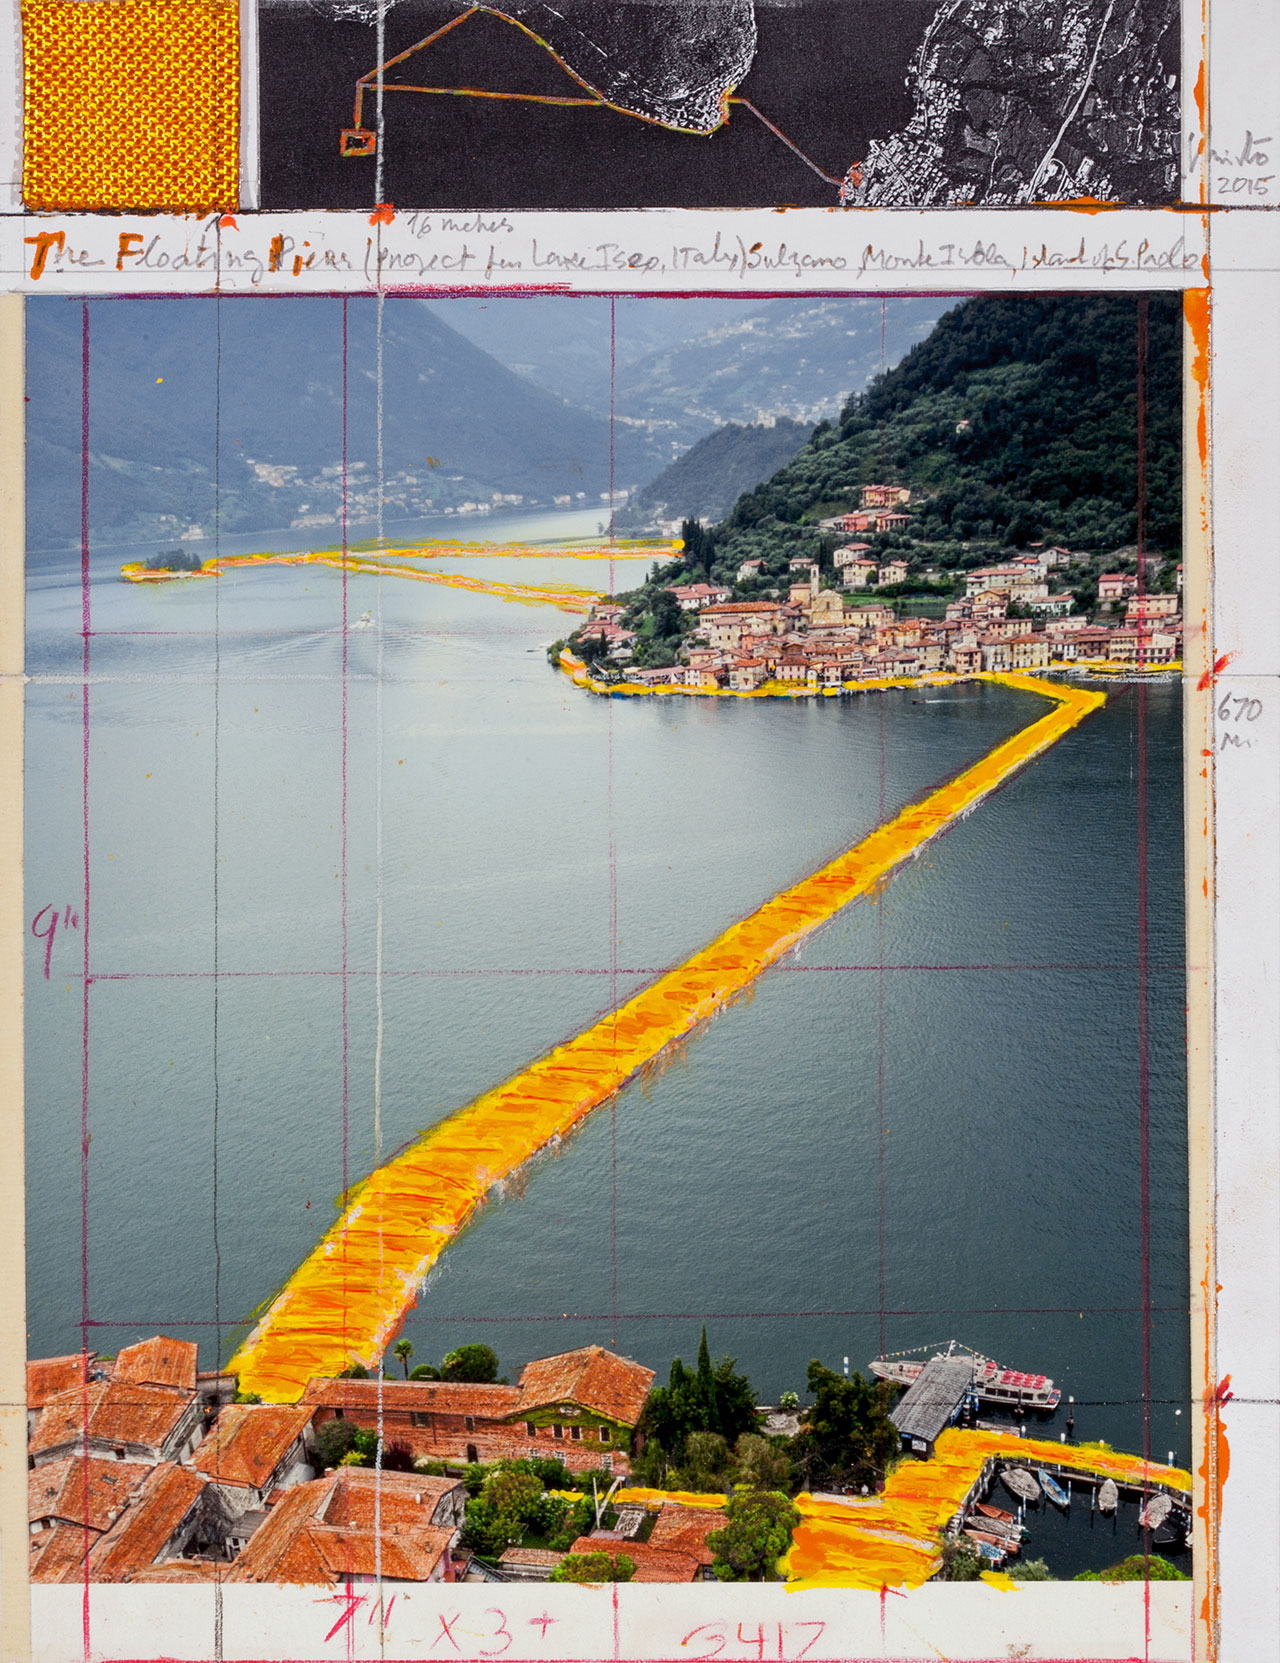 Christo, Collage 2015. 11 x 8 1/2" (28 x 21.5 cm). Pencil, wax crayon, enamel paint, photograph by Wolfgang Volz, aerial photograph and fabric sample. Photo by André Grossmann © 2015 Christo.